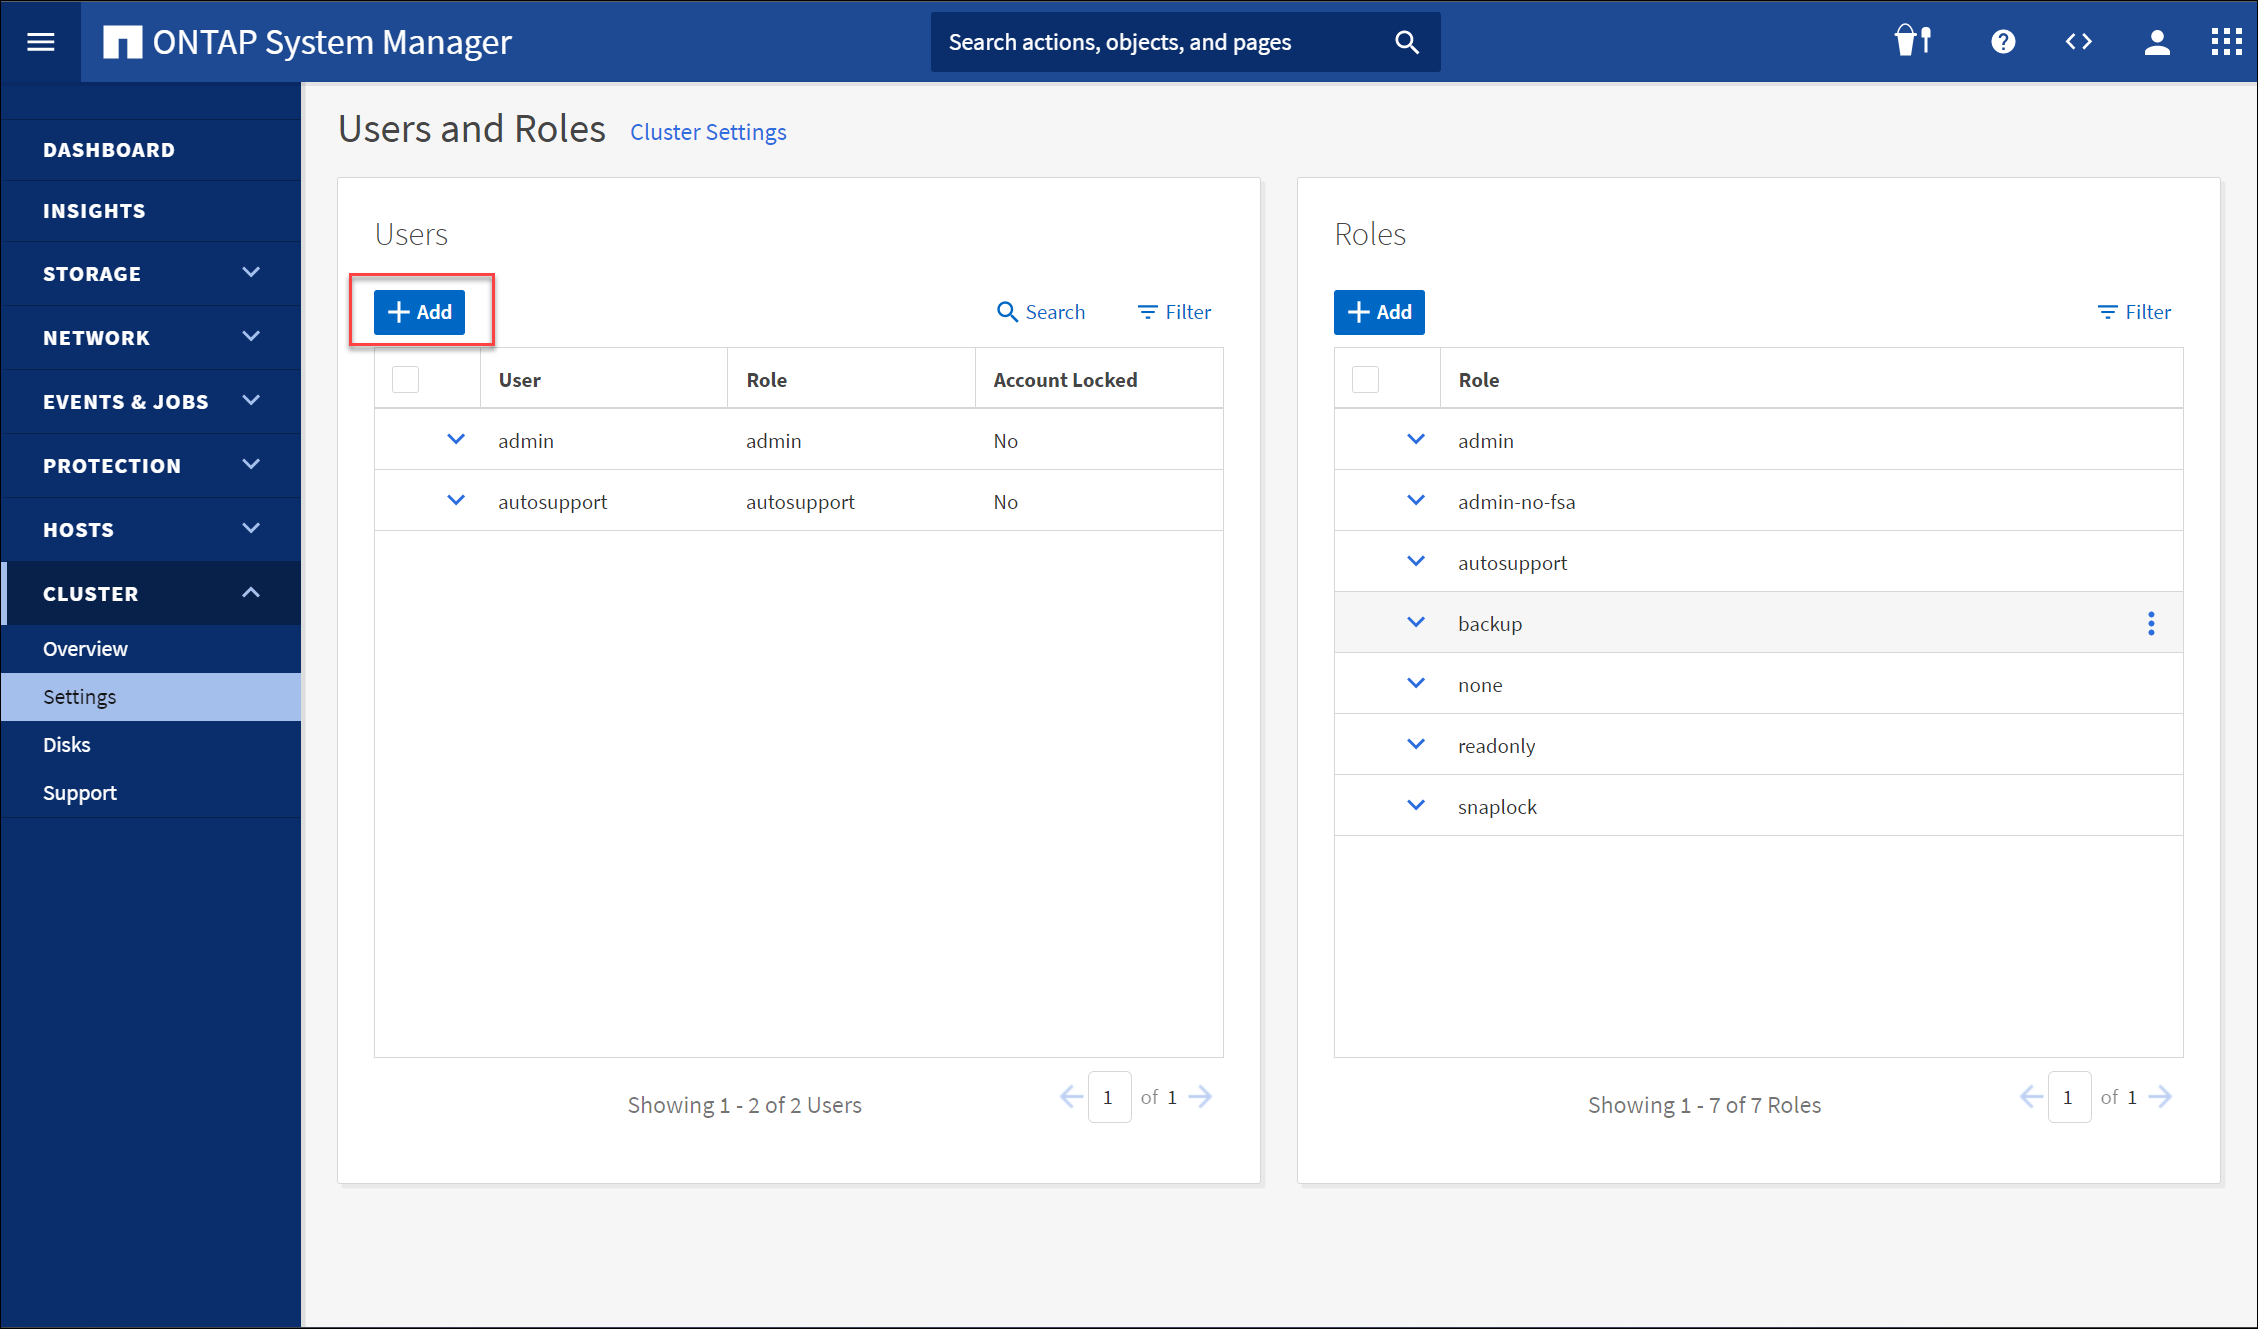 Screenshot of the NetApp ONTAP System Manager - Cluster Settings - Users and Roles UI